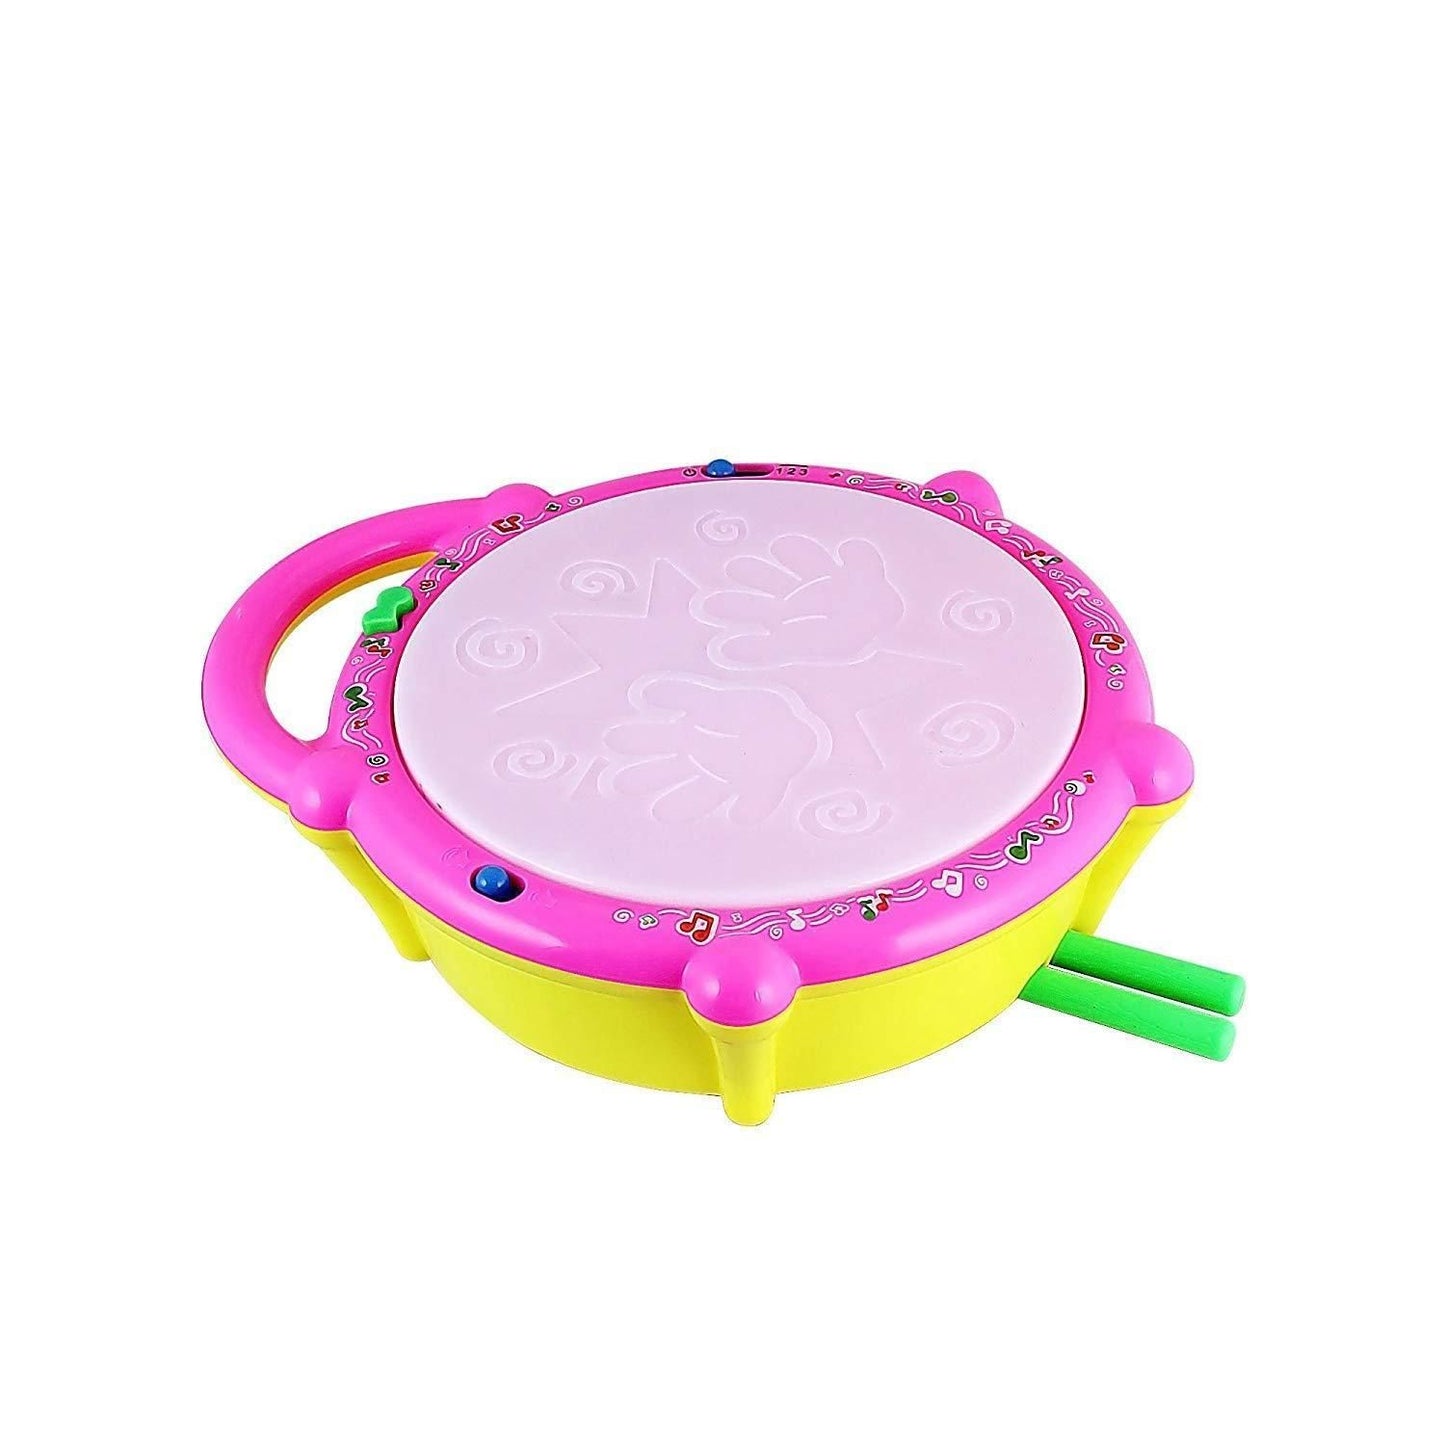 3D Flash Musical Drum Toys for Kids